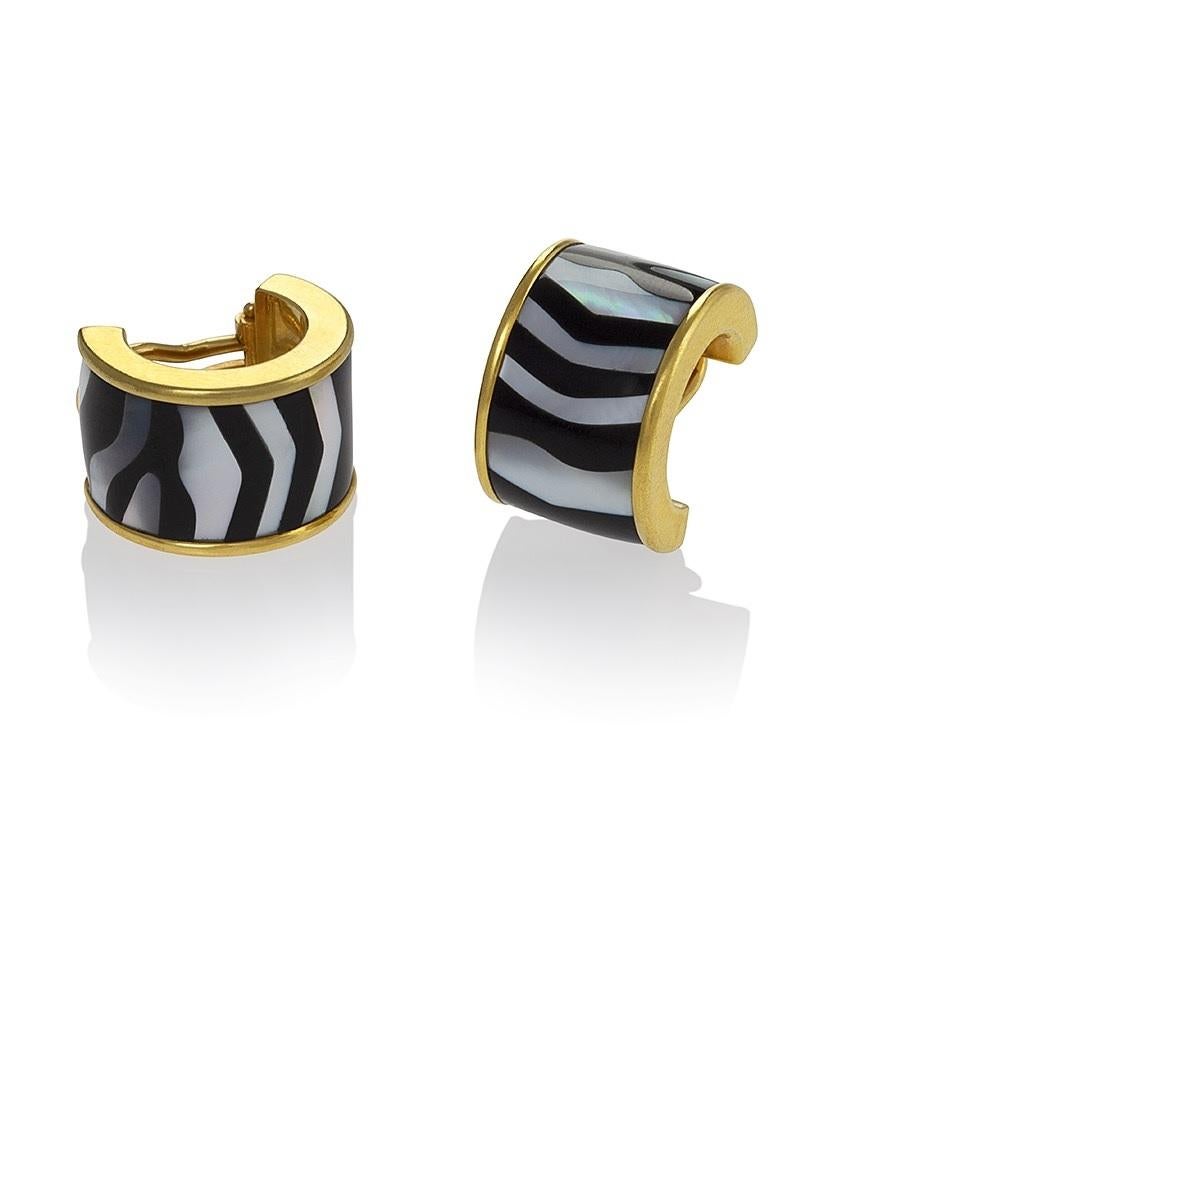 A pair of Estate 18 karat gold earrings with mother of pearl and black jade by Tiffany & Co. The hoop earrings have alternating irregularly sectioned mother of pearl and black jade strips. Circa 2000.

Signed, 